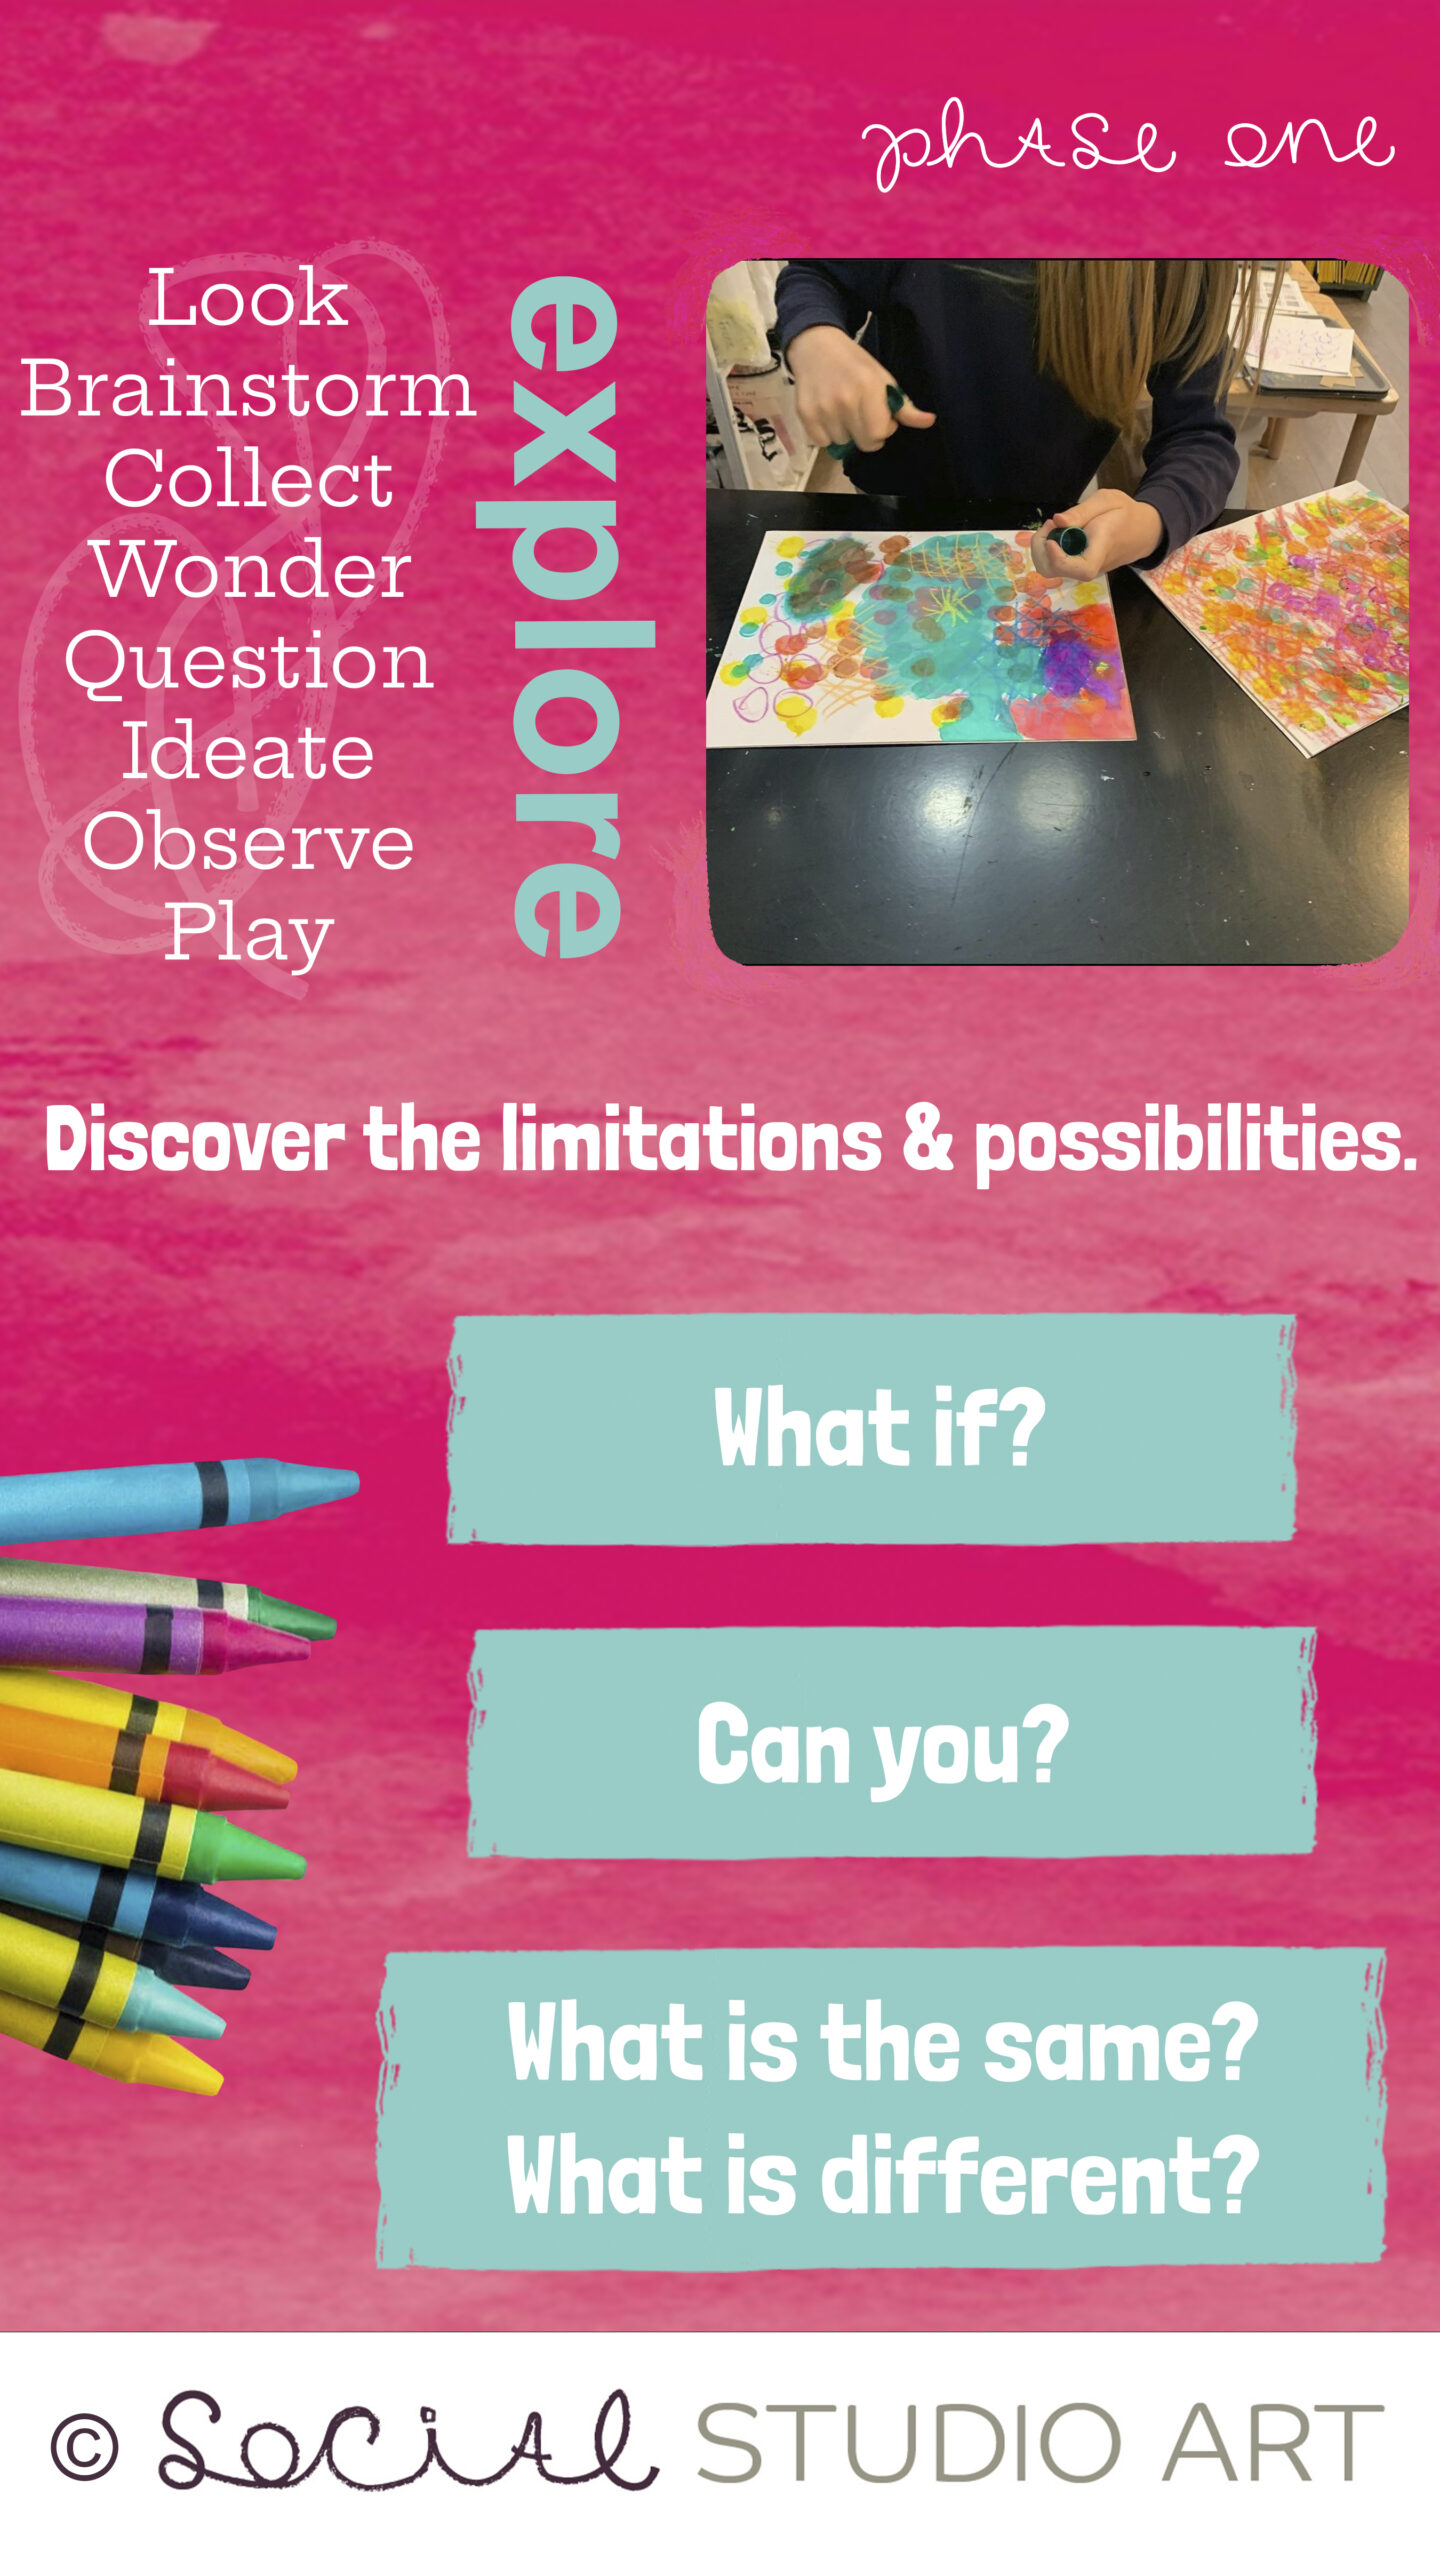 Explore, discover the limitations and possibilities. What if? Can you? What is the same? What is different?